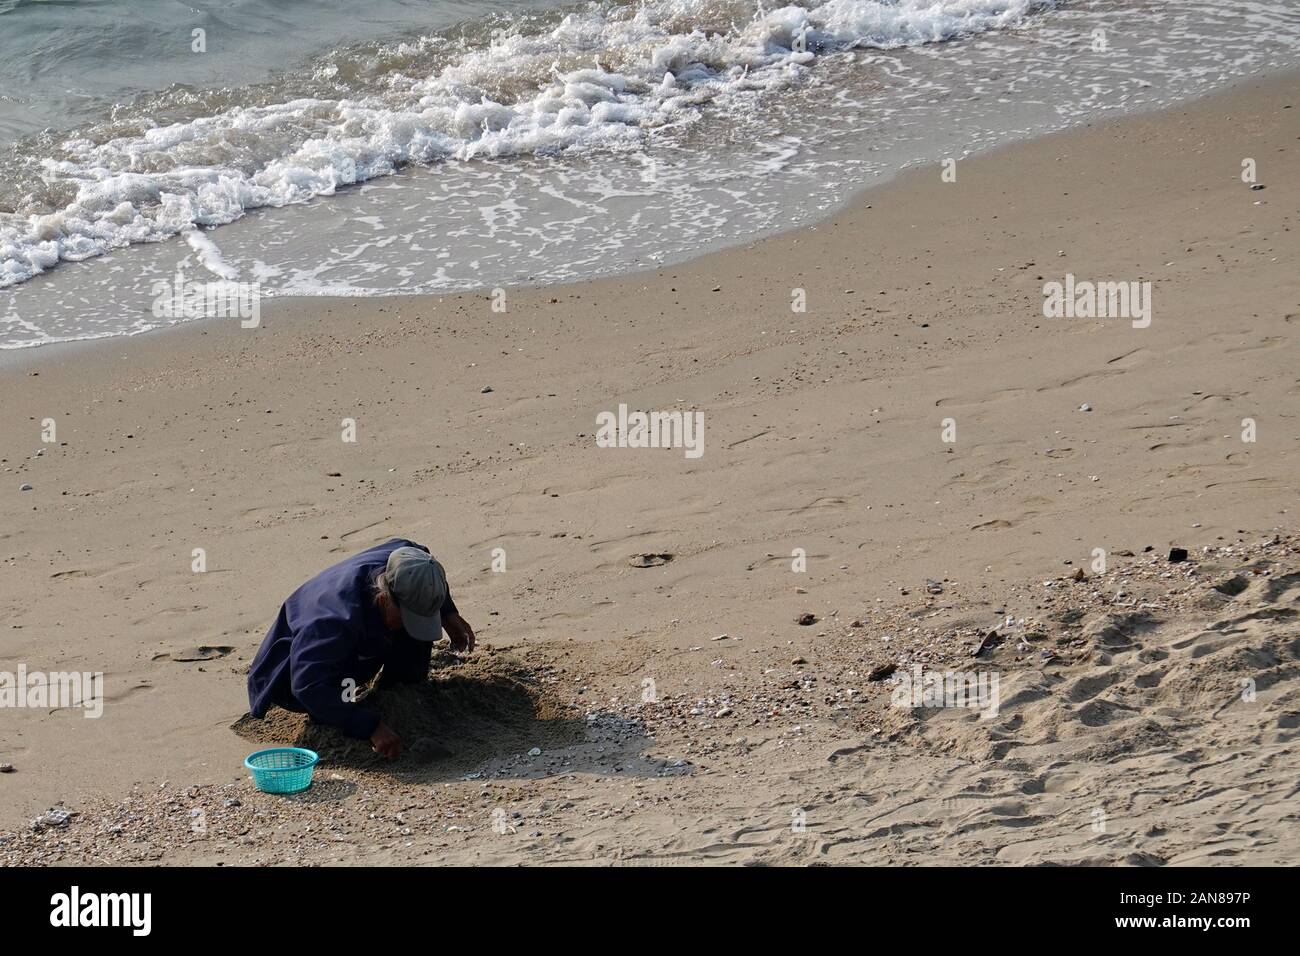 Pattaya, Thailand - December 23, 2019: Elder woman sitting on beach and trying to find clams. Stock Photo